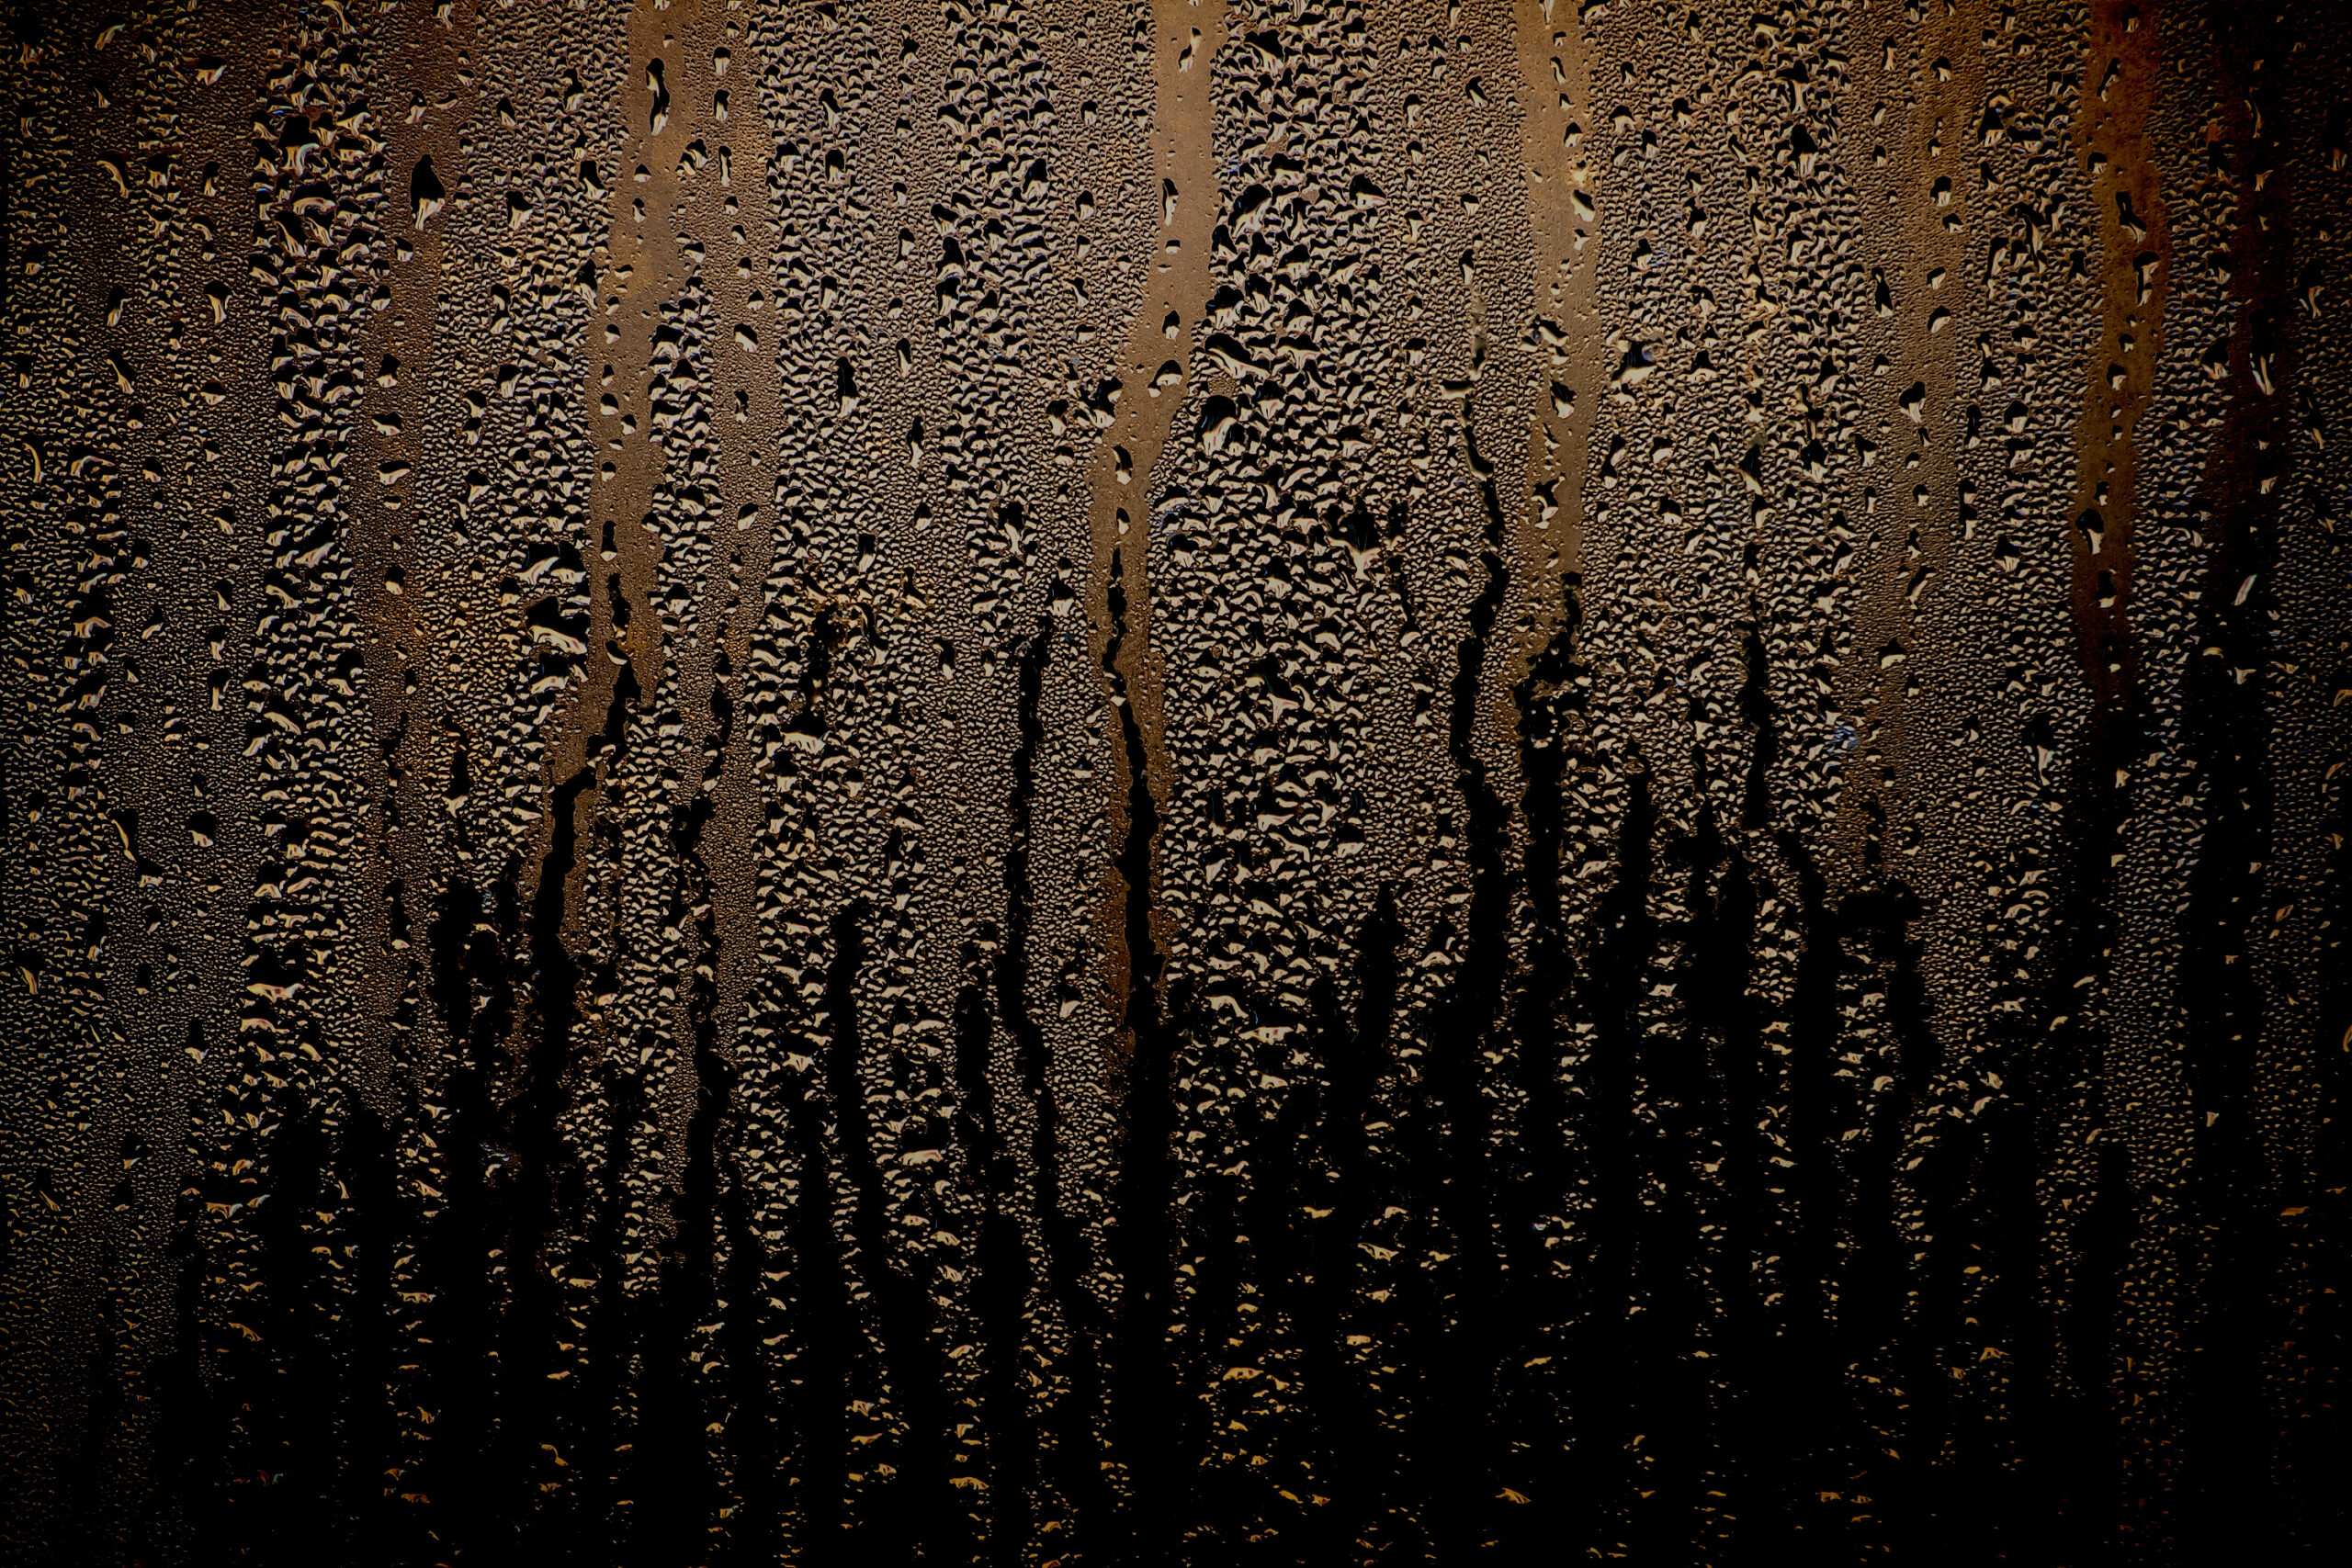 condensation water droplets in a window